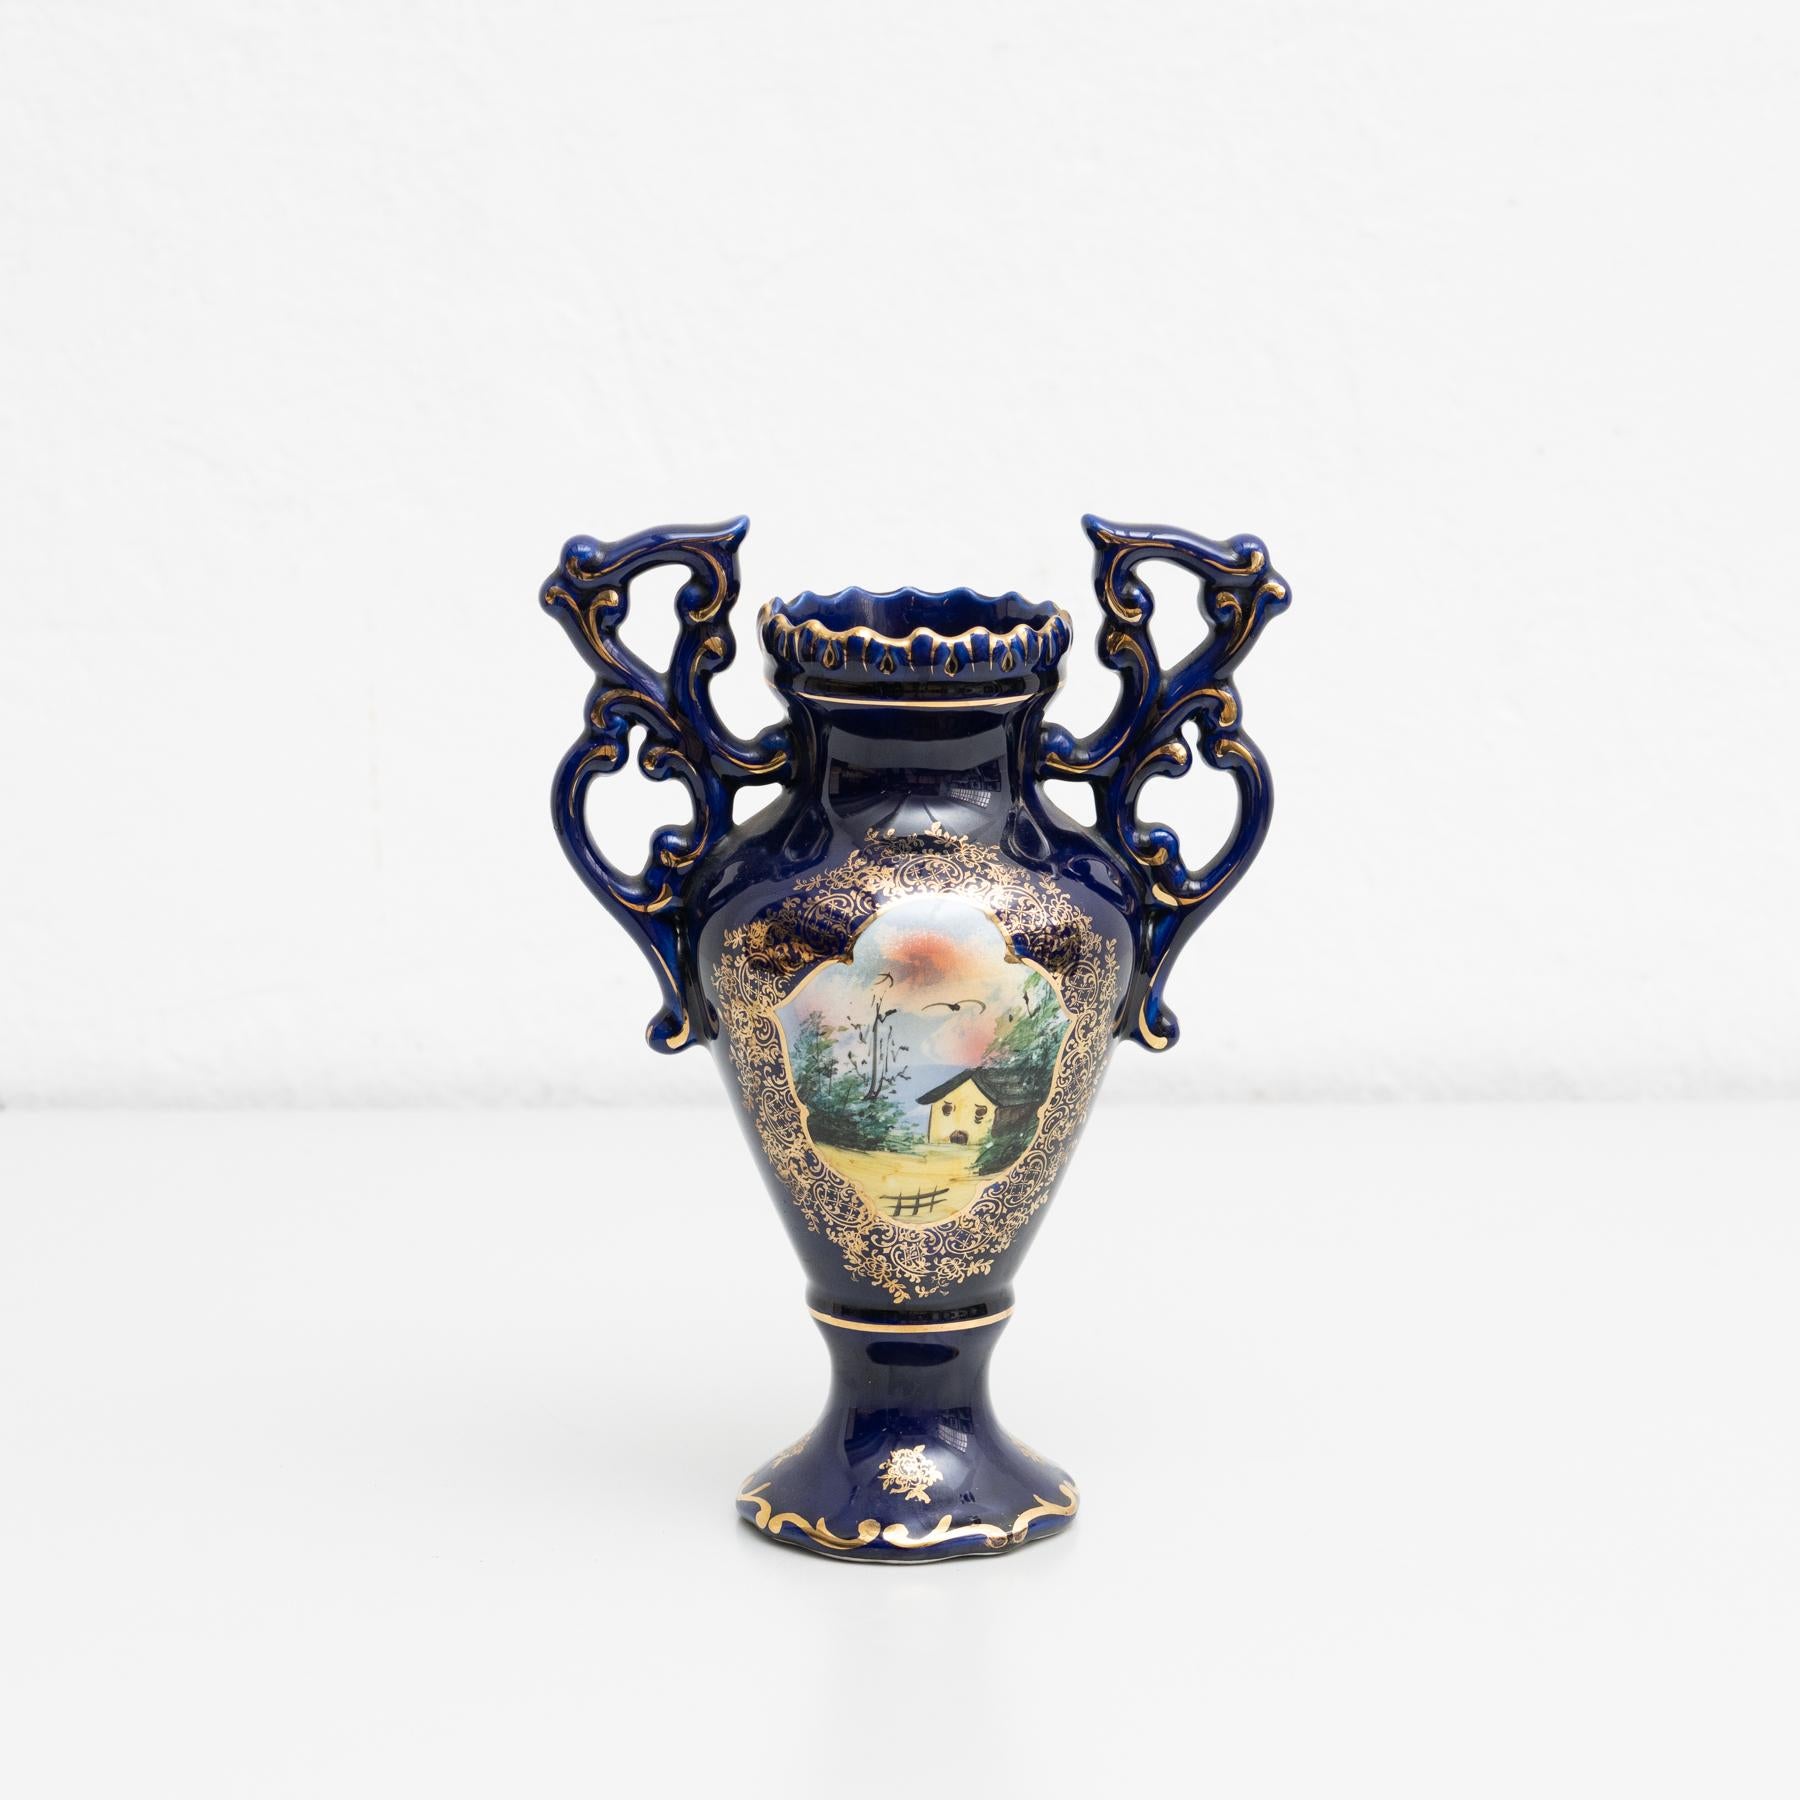 Isabelline hand-painted porcelain vase in the Serves style. Beautifully decorated with a nice scene on the front side.

Made by unknown manufacturer in France, Early 20th Century.

In original condition, with minor wear consistent with age and